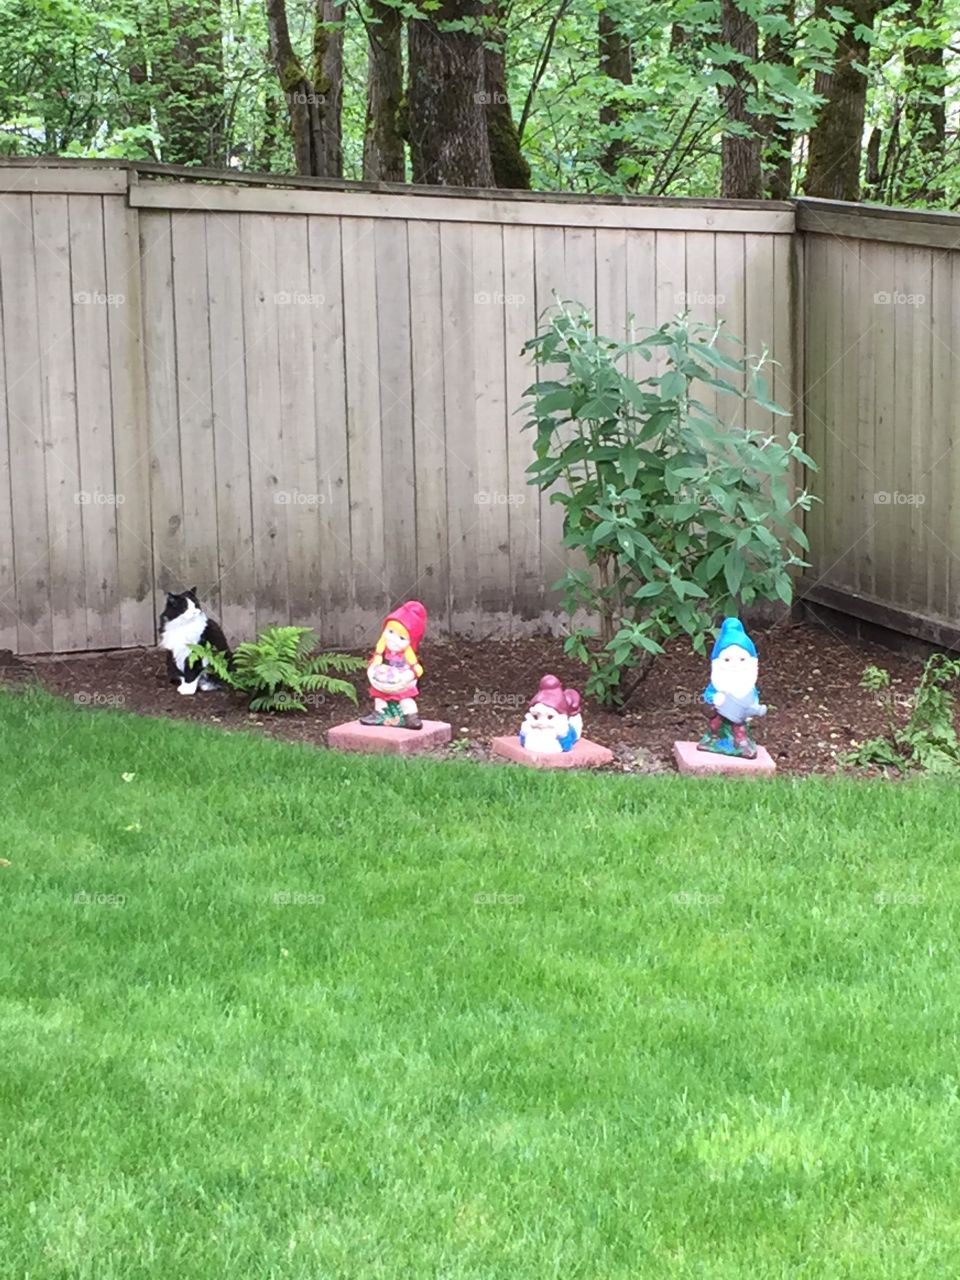 Cat Scene With Gnomes. Cat Posing With Gnomes